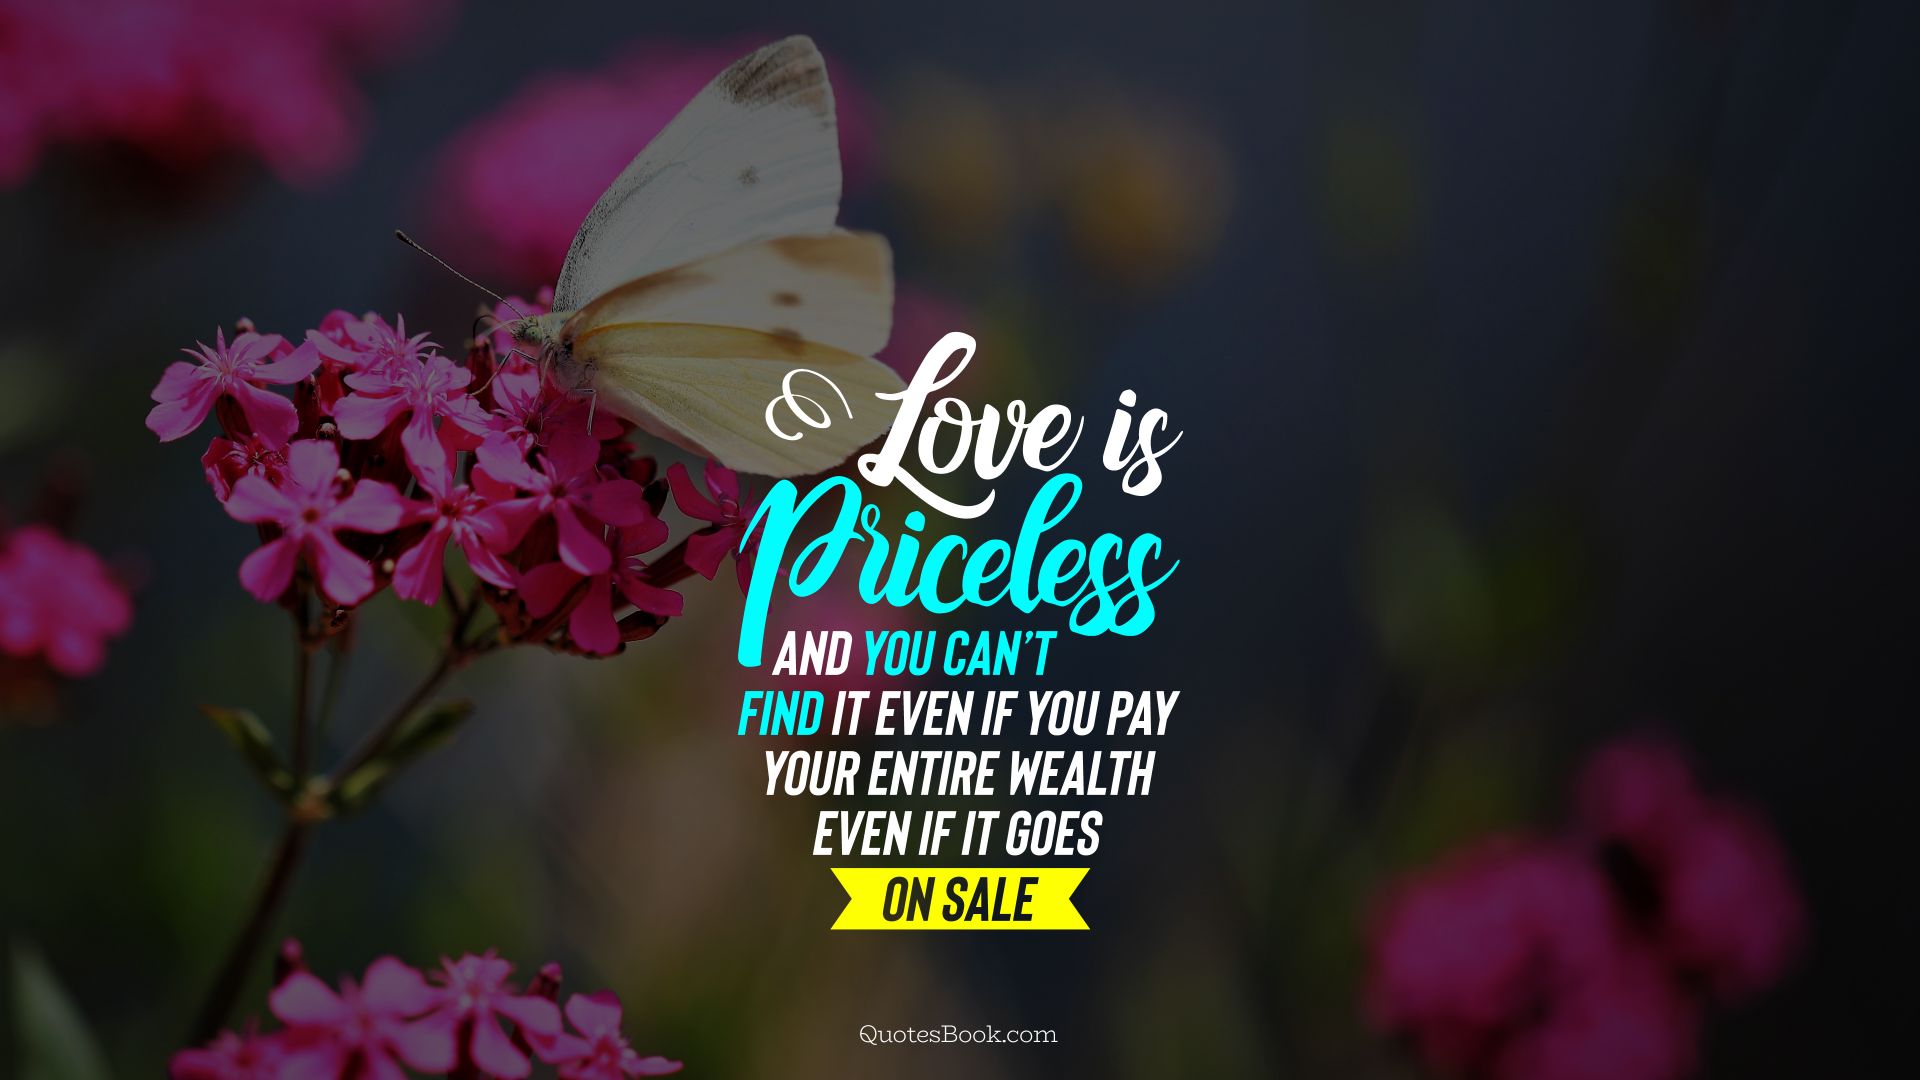 Love is priceless and you can’t find it even if you pay your entire wealth even if it goes on sale